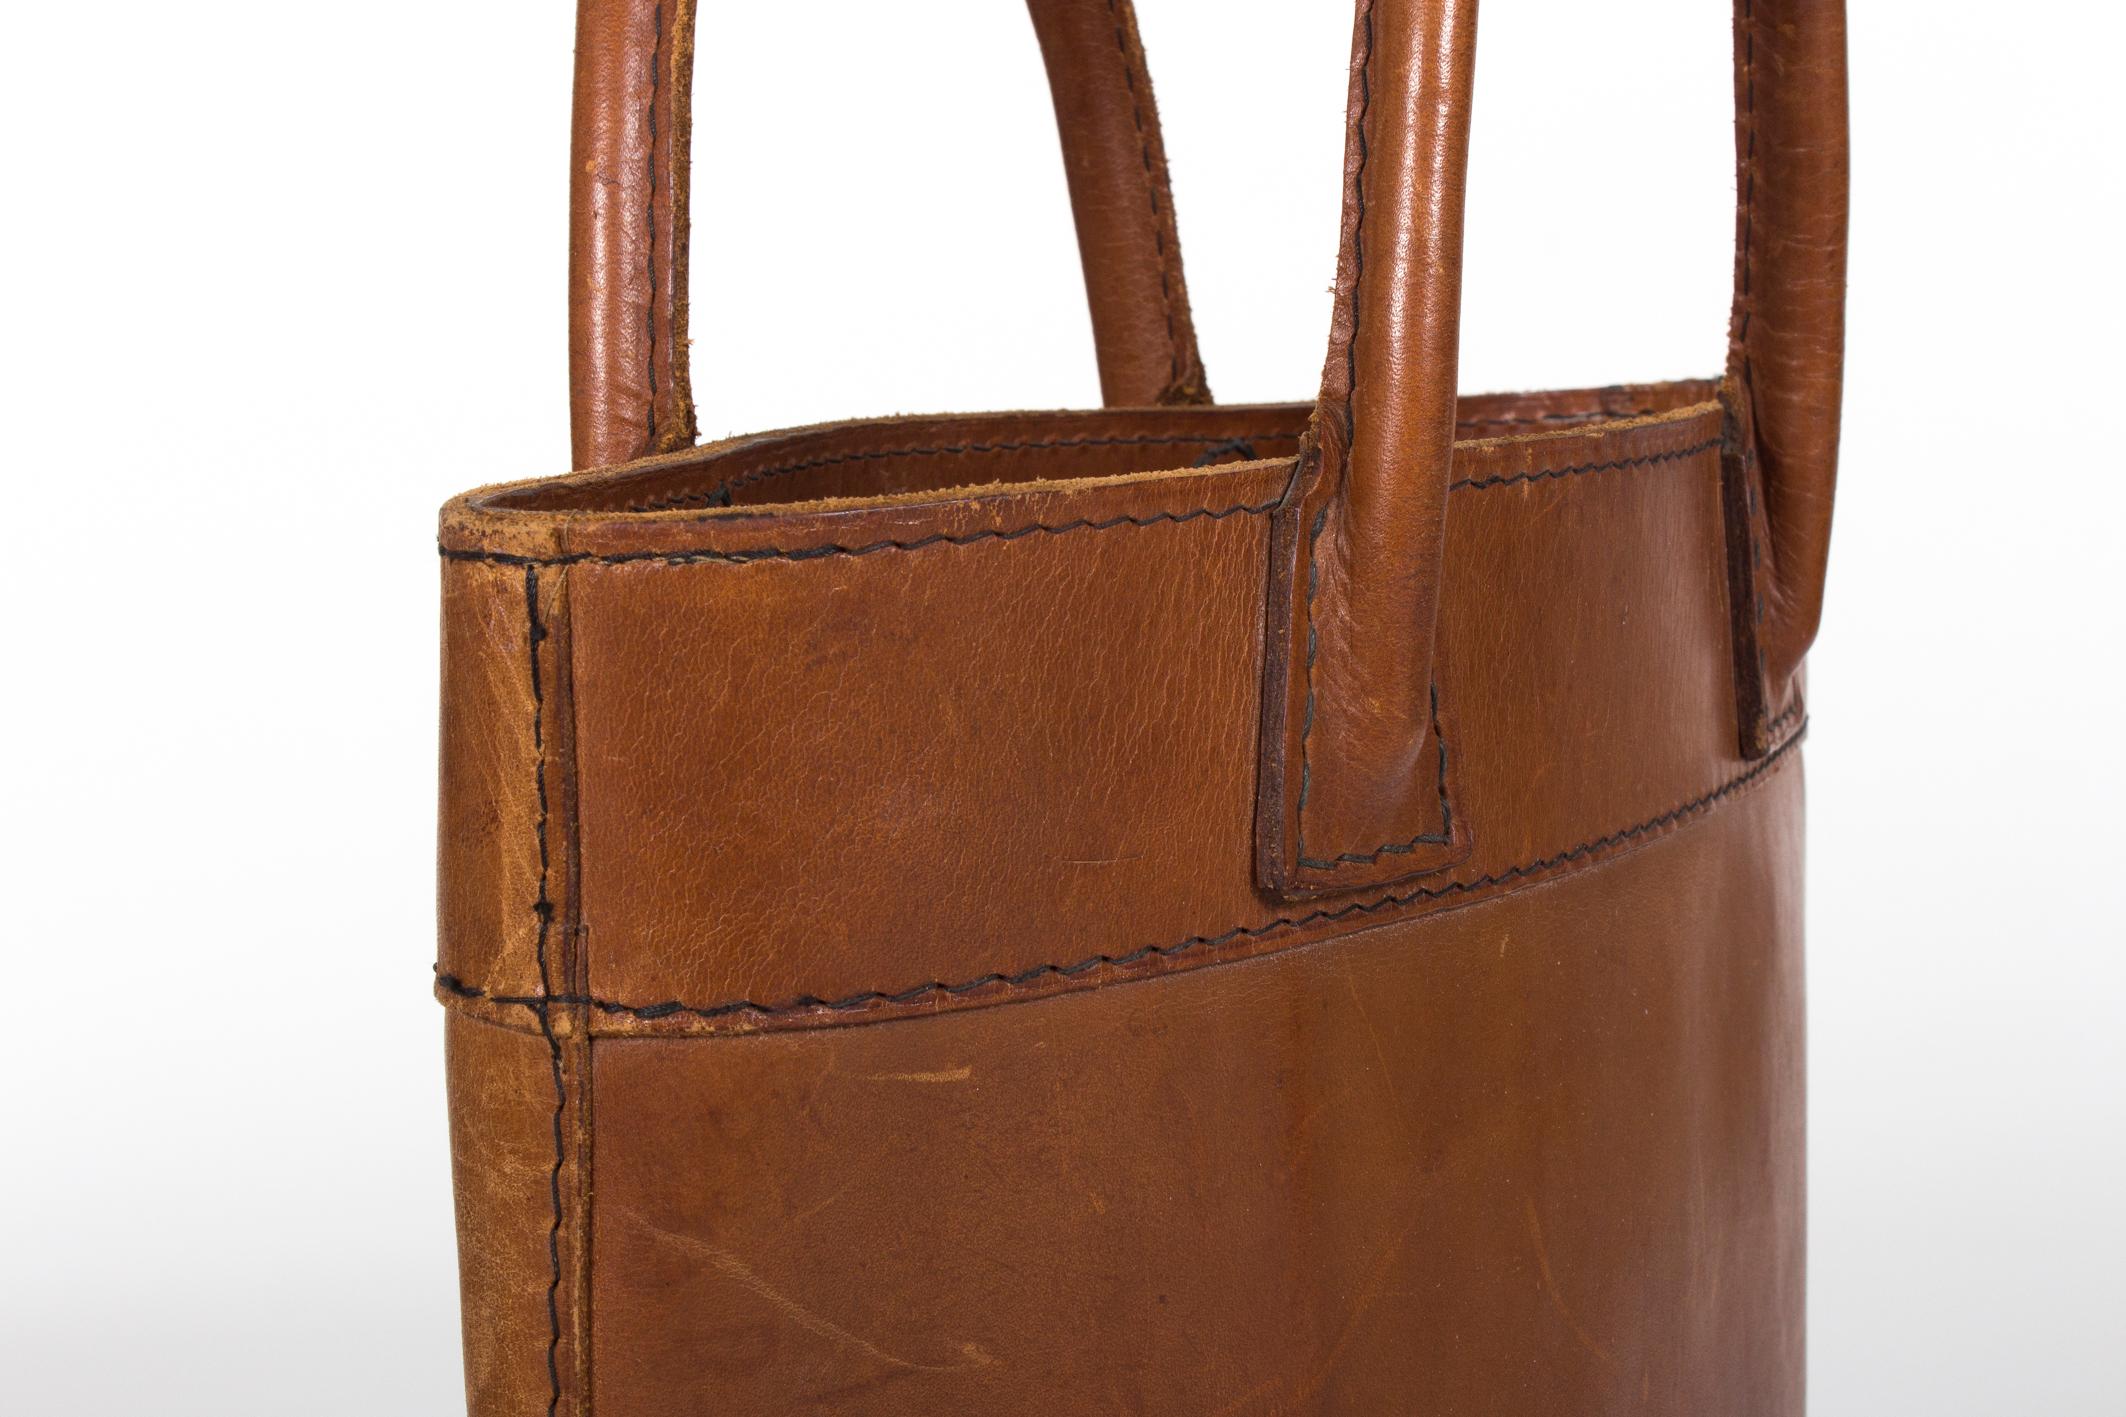 European Rare and Marked Collectors Auböck Midcentury Leather Bag, Late 1950s-Early 1960s